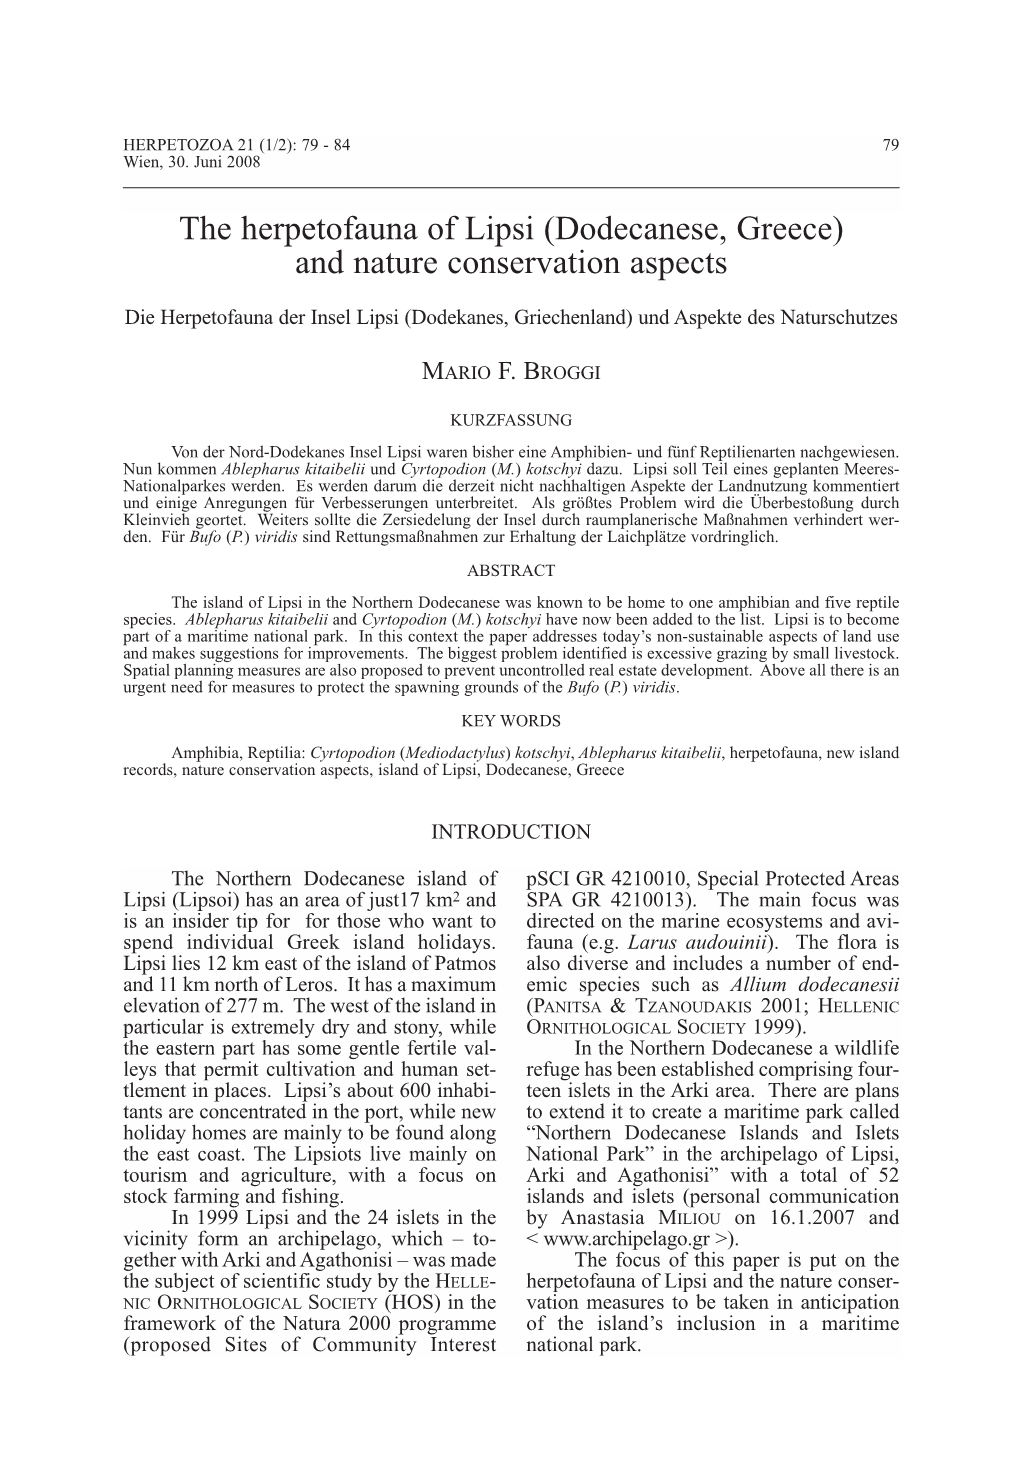 The Herpetofauna of Lipsi (Dodecanese, Greece) and Nature Conservation Aspects